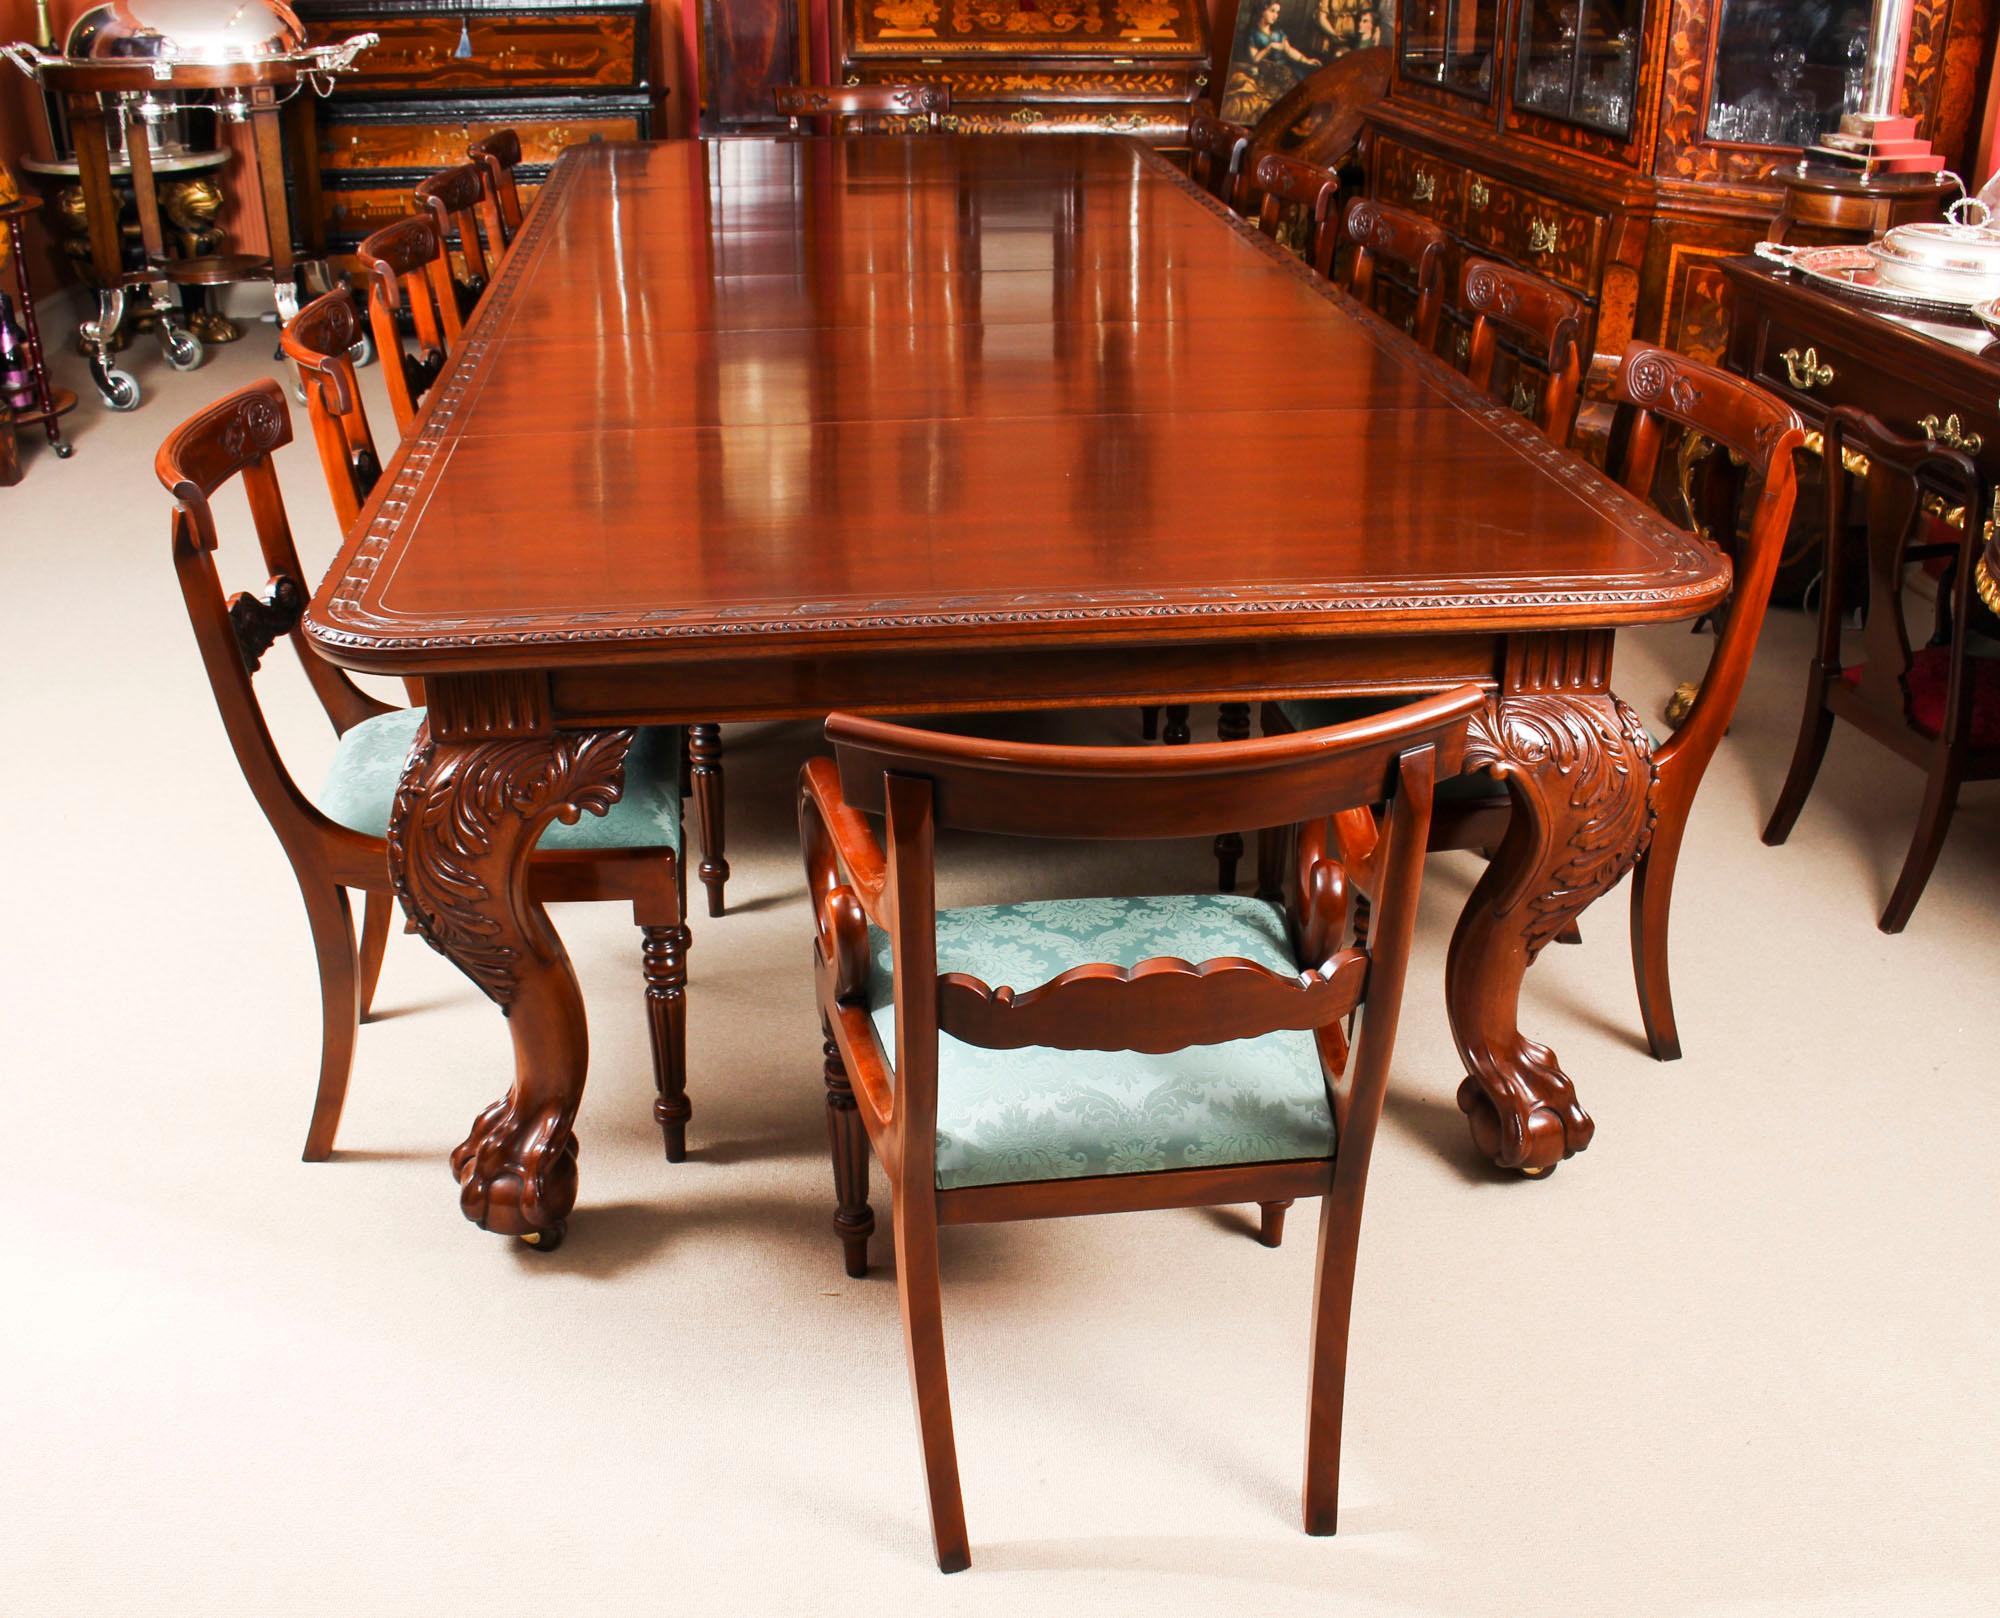 This is a beautiful flame mahogany Victorian dining set comprising an antique extending dining table, by Edwards & Roberts, Wardour Street, London, and dating from the 1880s and a set of twelve vintage dining chairs.

This amazing antique dining